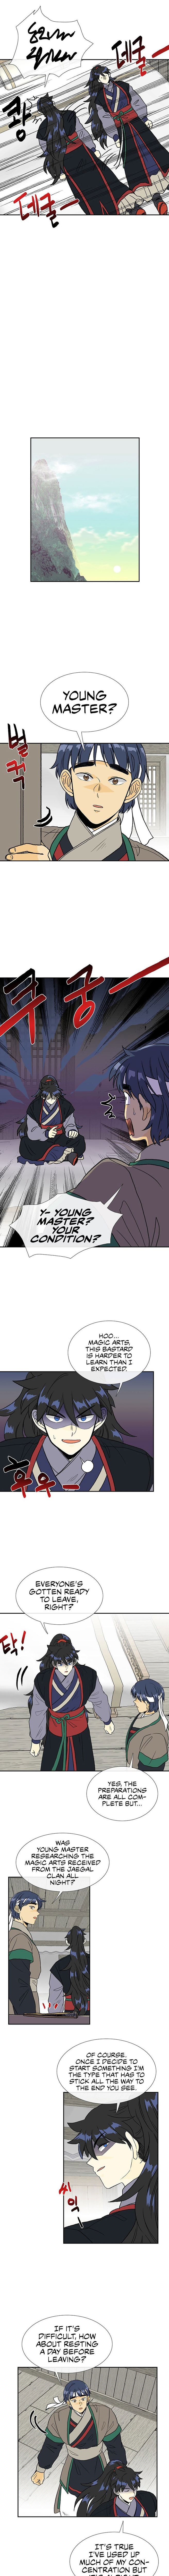 The Scholar's Reincarnation Chapter 143 page 7